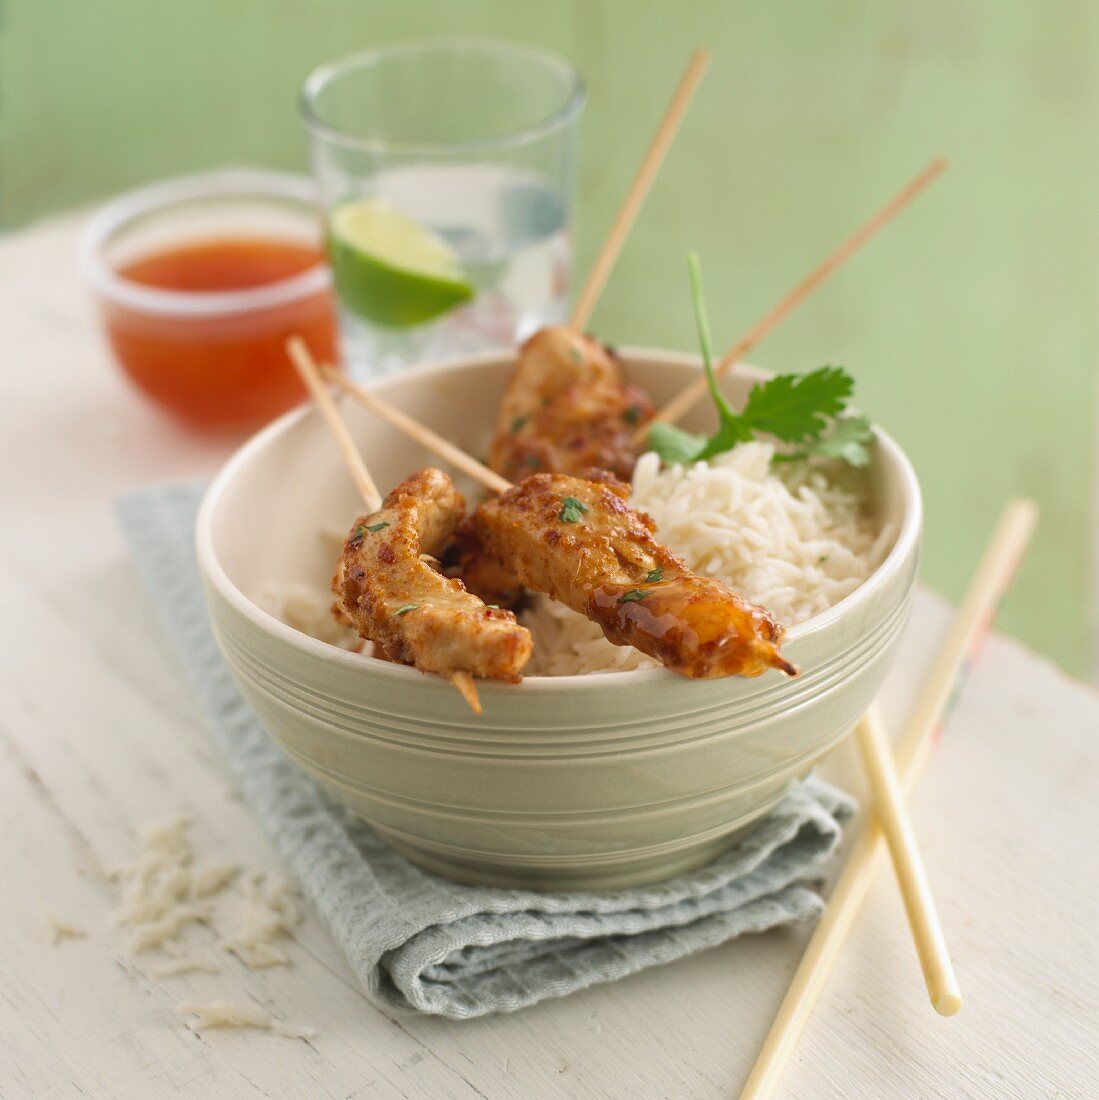 Chicken satay skewers on a bed of rice